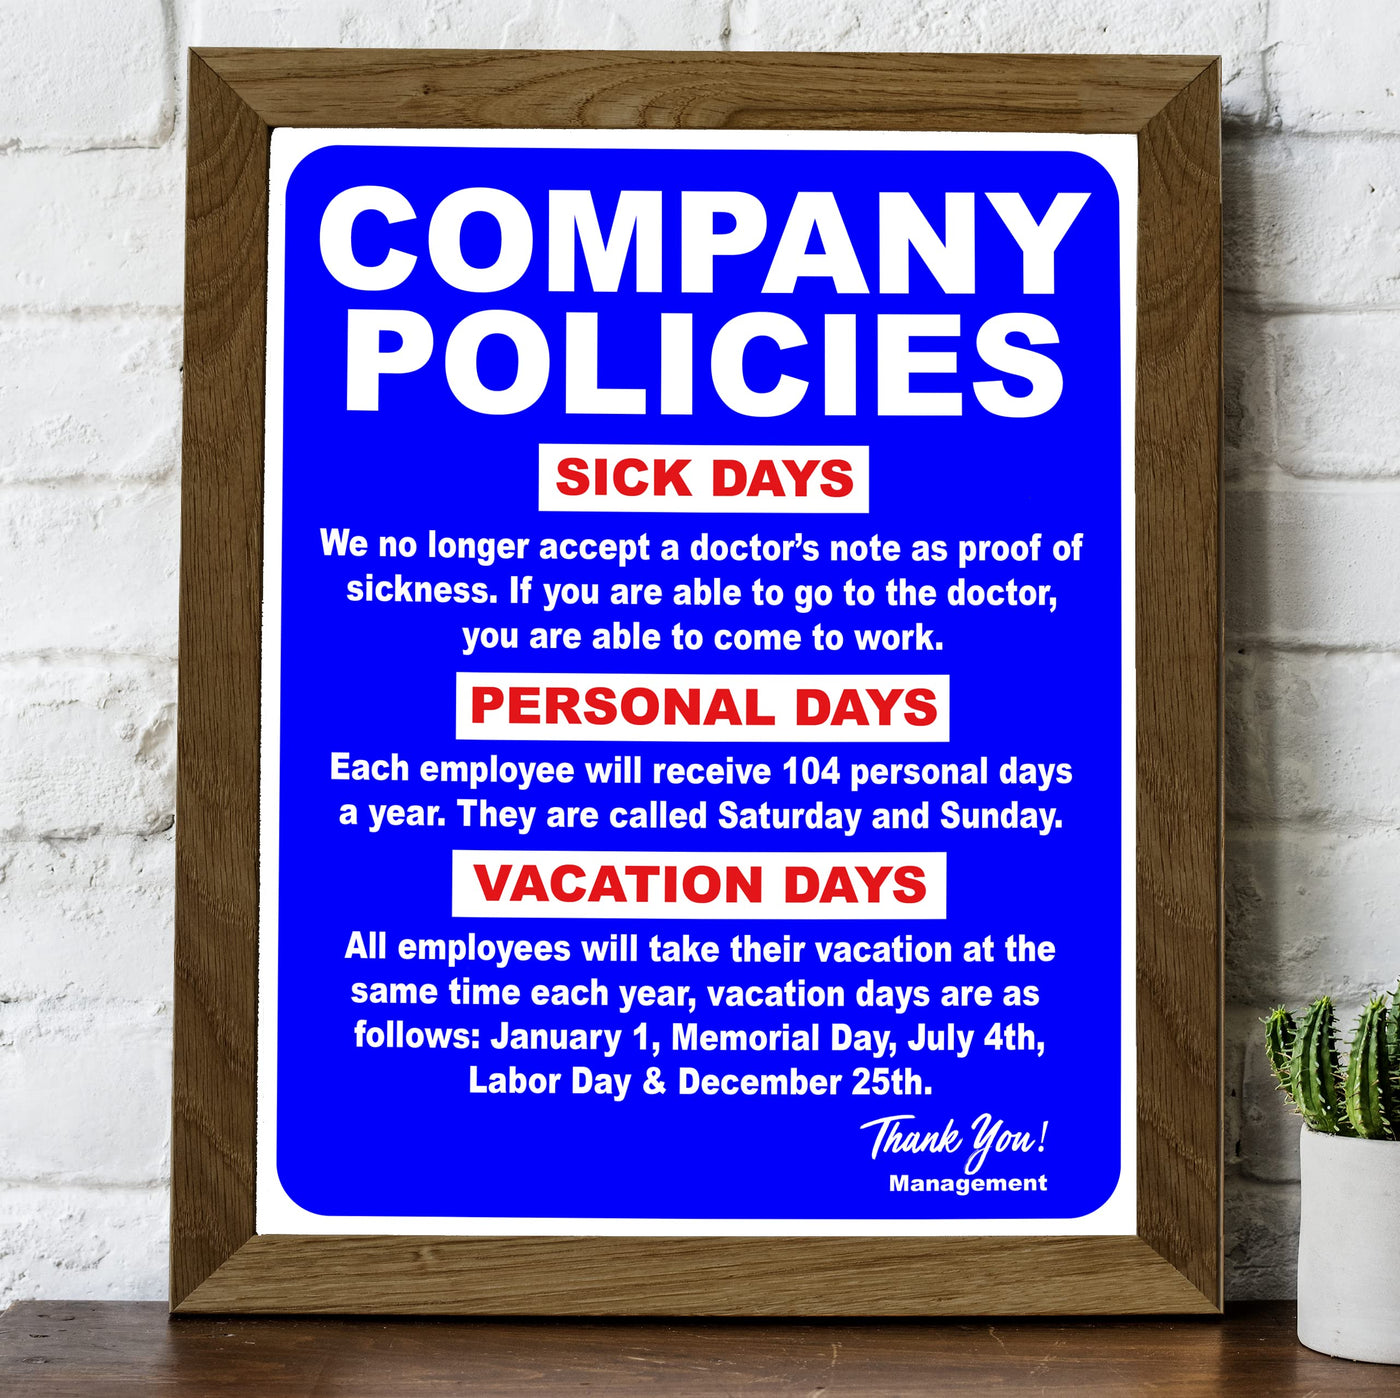 Company Policies- Funny Office Sign - 8 x 10" Wall Decor Print-Ready To Frame. Humorous Wall Print for Home-Office-Shop-Garage-Bar. Great Desk & Cubicle Sign! Perfect Gag Gift-Novelty Sign!